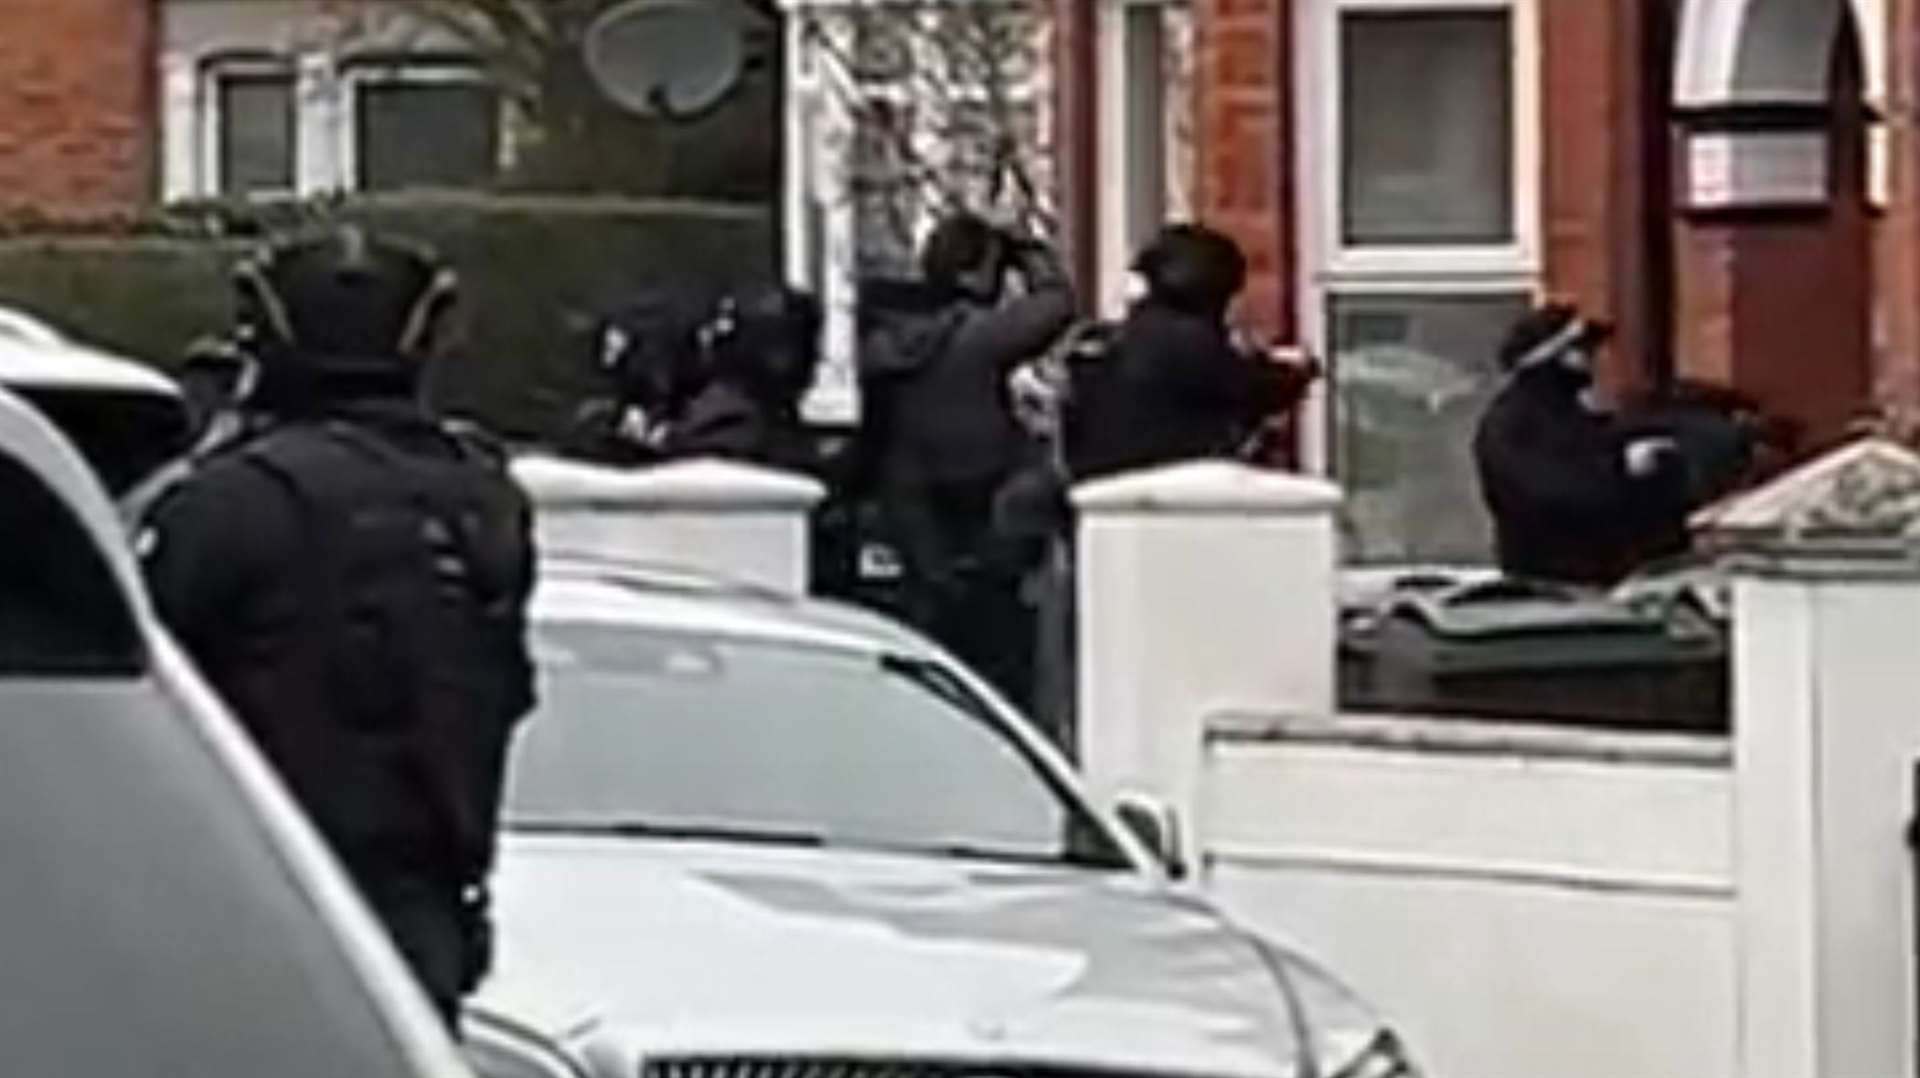 Armed police were seen entering a house in Godinton Road